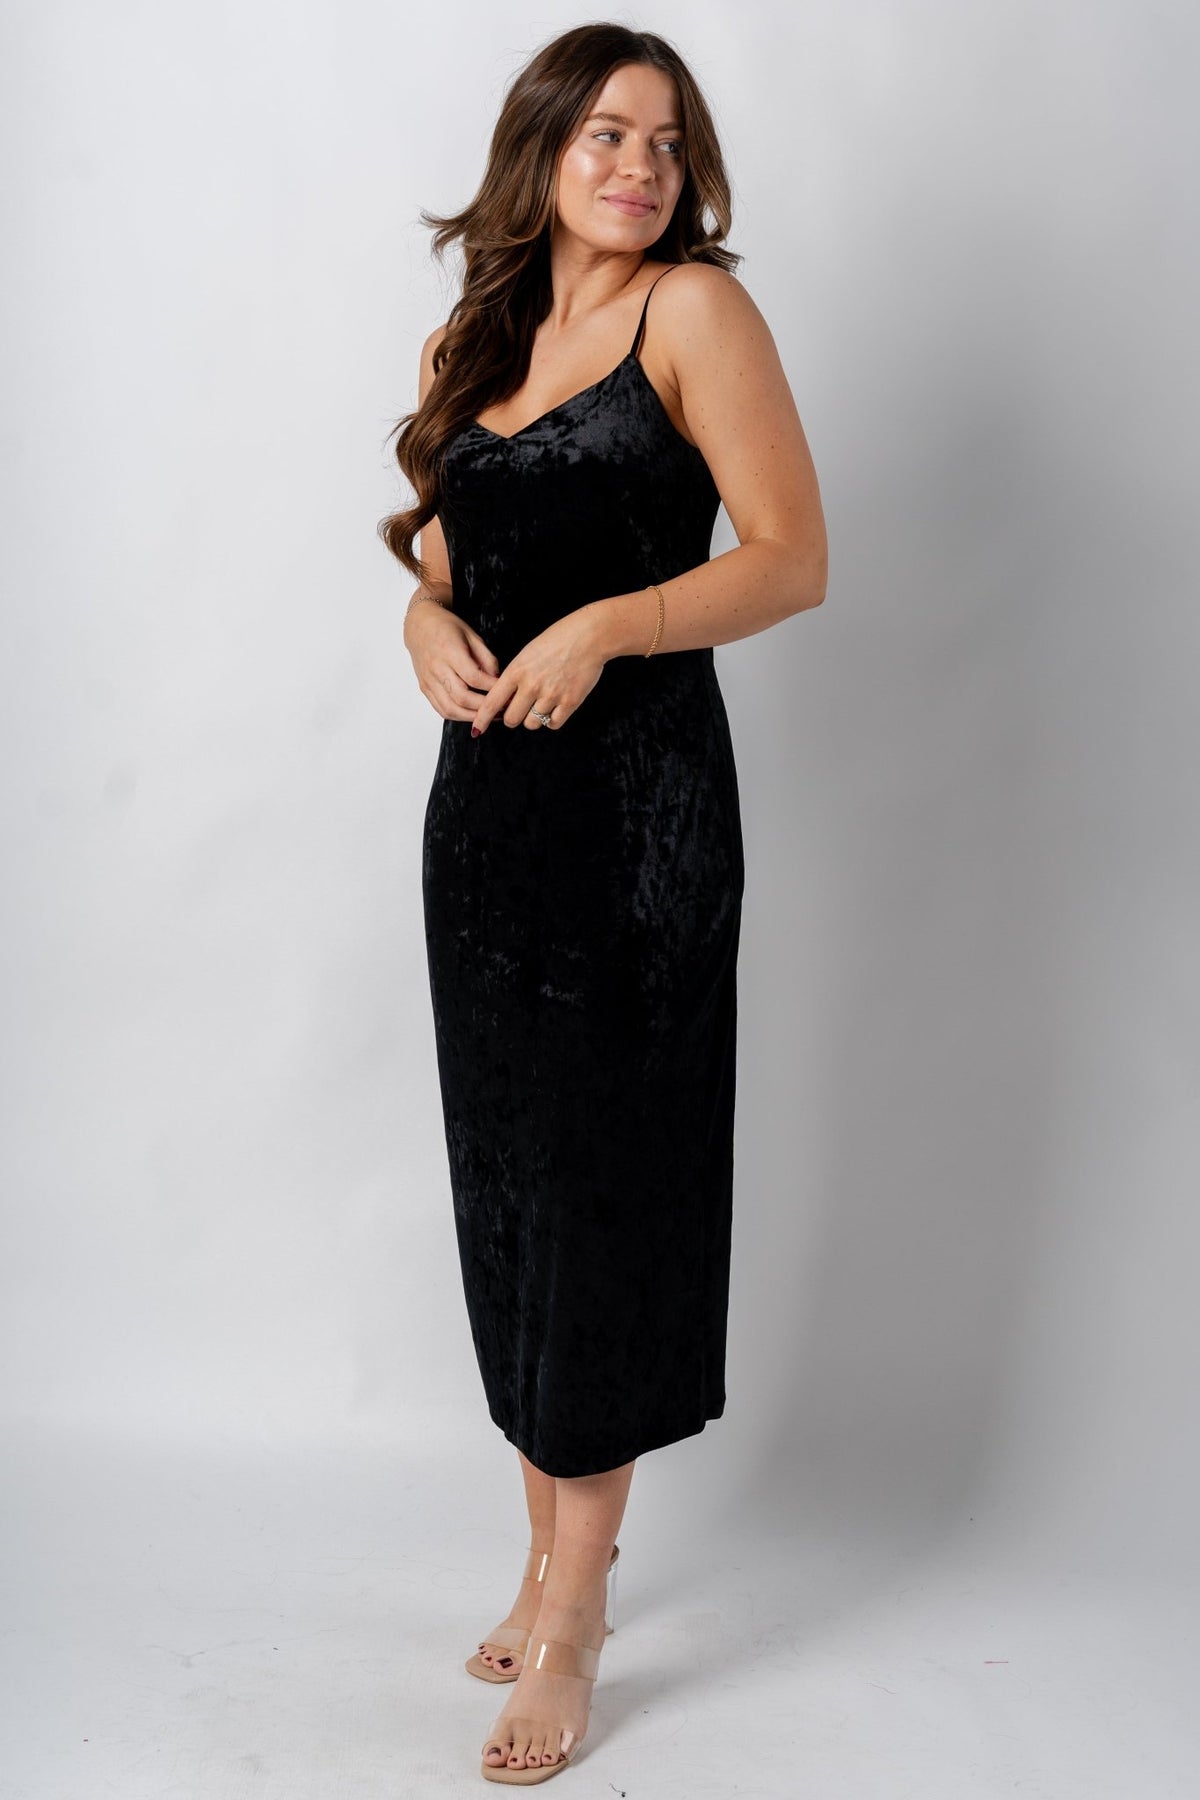 Z Supply Selina velvet dress black - Z Supply Dress - Z Supply Tops, Dresses, Tanks, Tees, Cardigans, Joggers and Loungewear at Lush Fashion Lounge